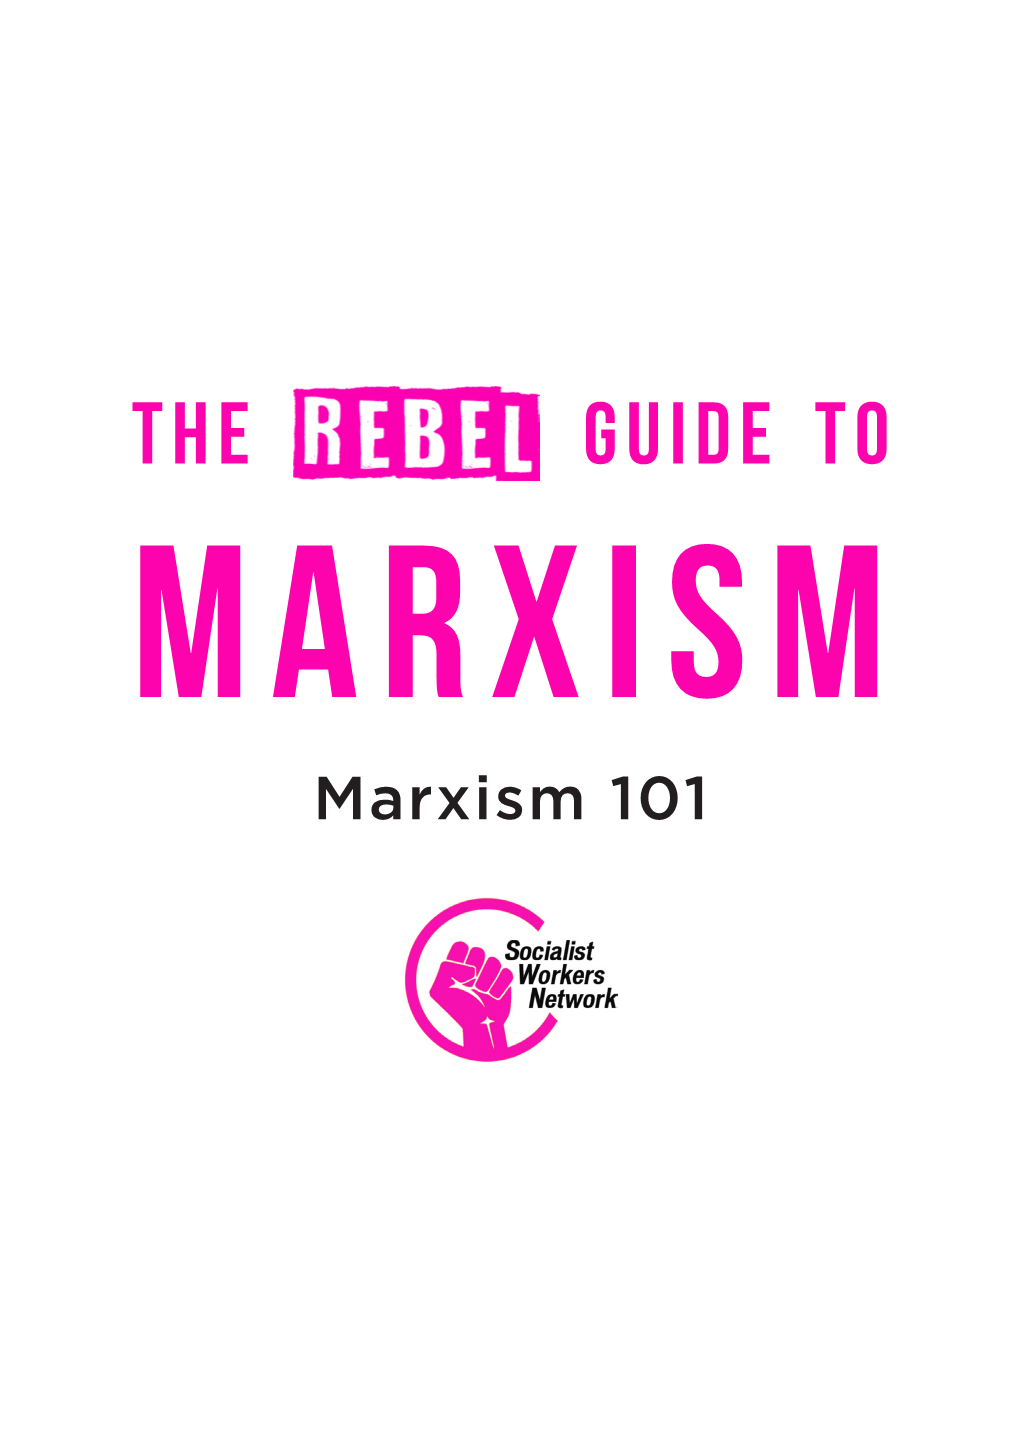 Read the Rebel's Guide to Marxism Series Here